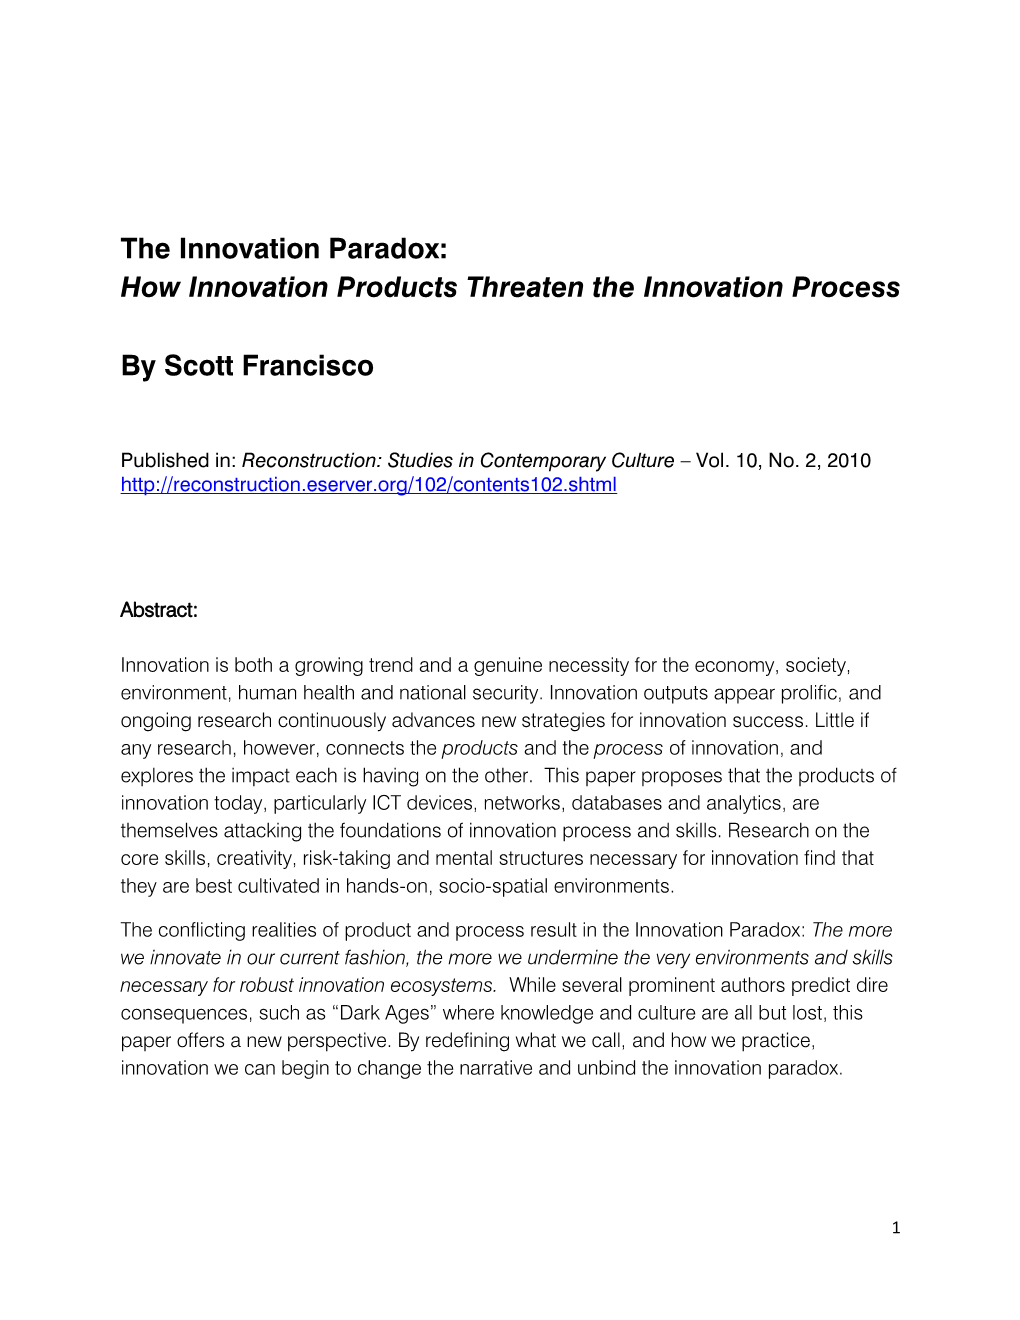 The Innovation Paradox: How Innovation Products Threaten the Innovation Process